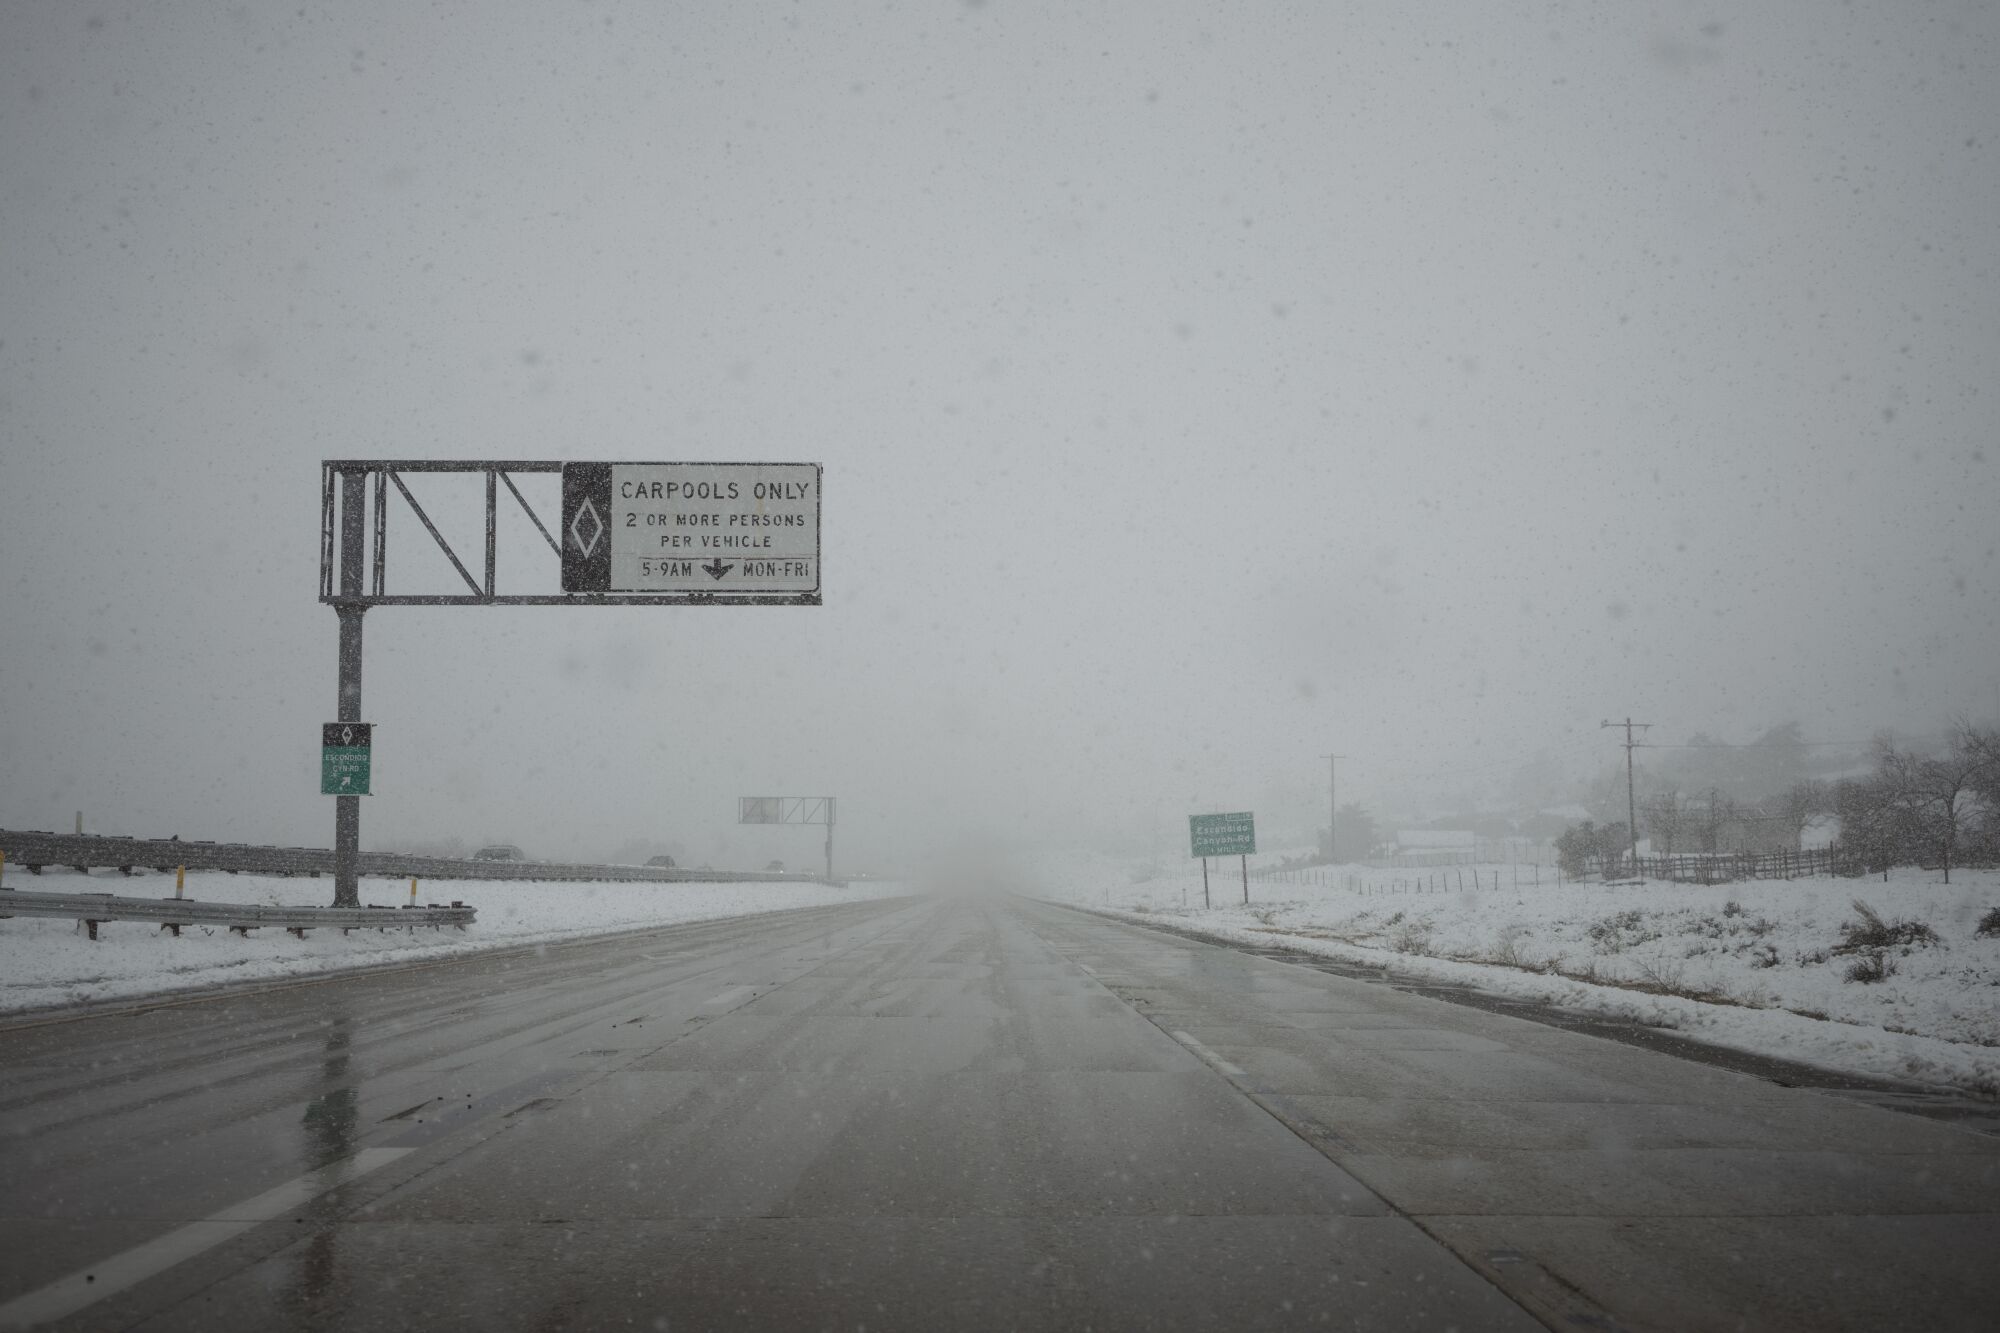 Heavy snow closed the 14 freeway during the storm in Acton.